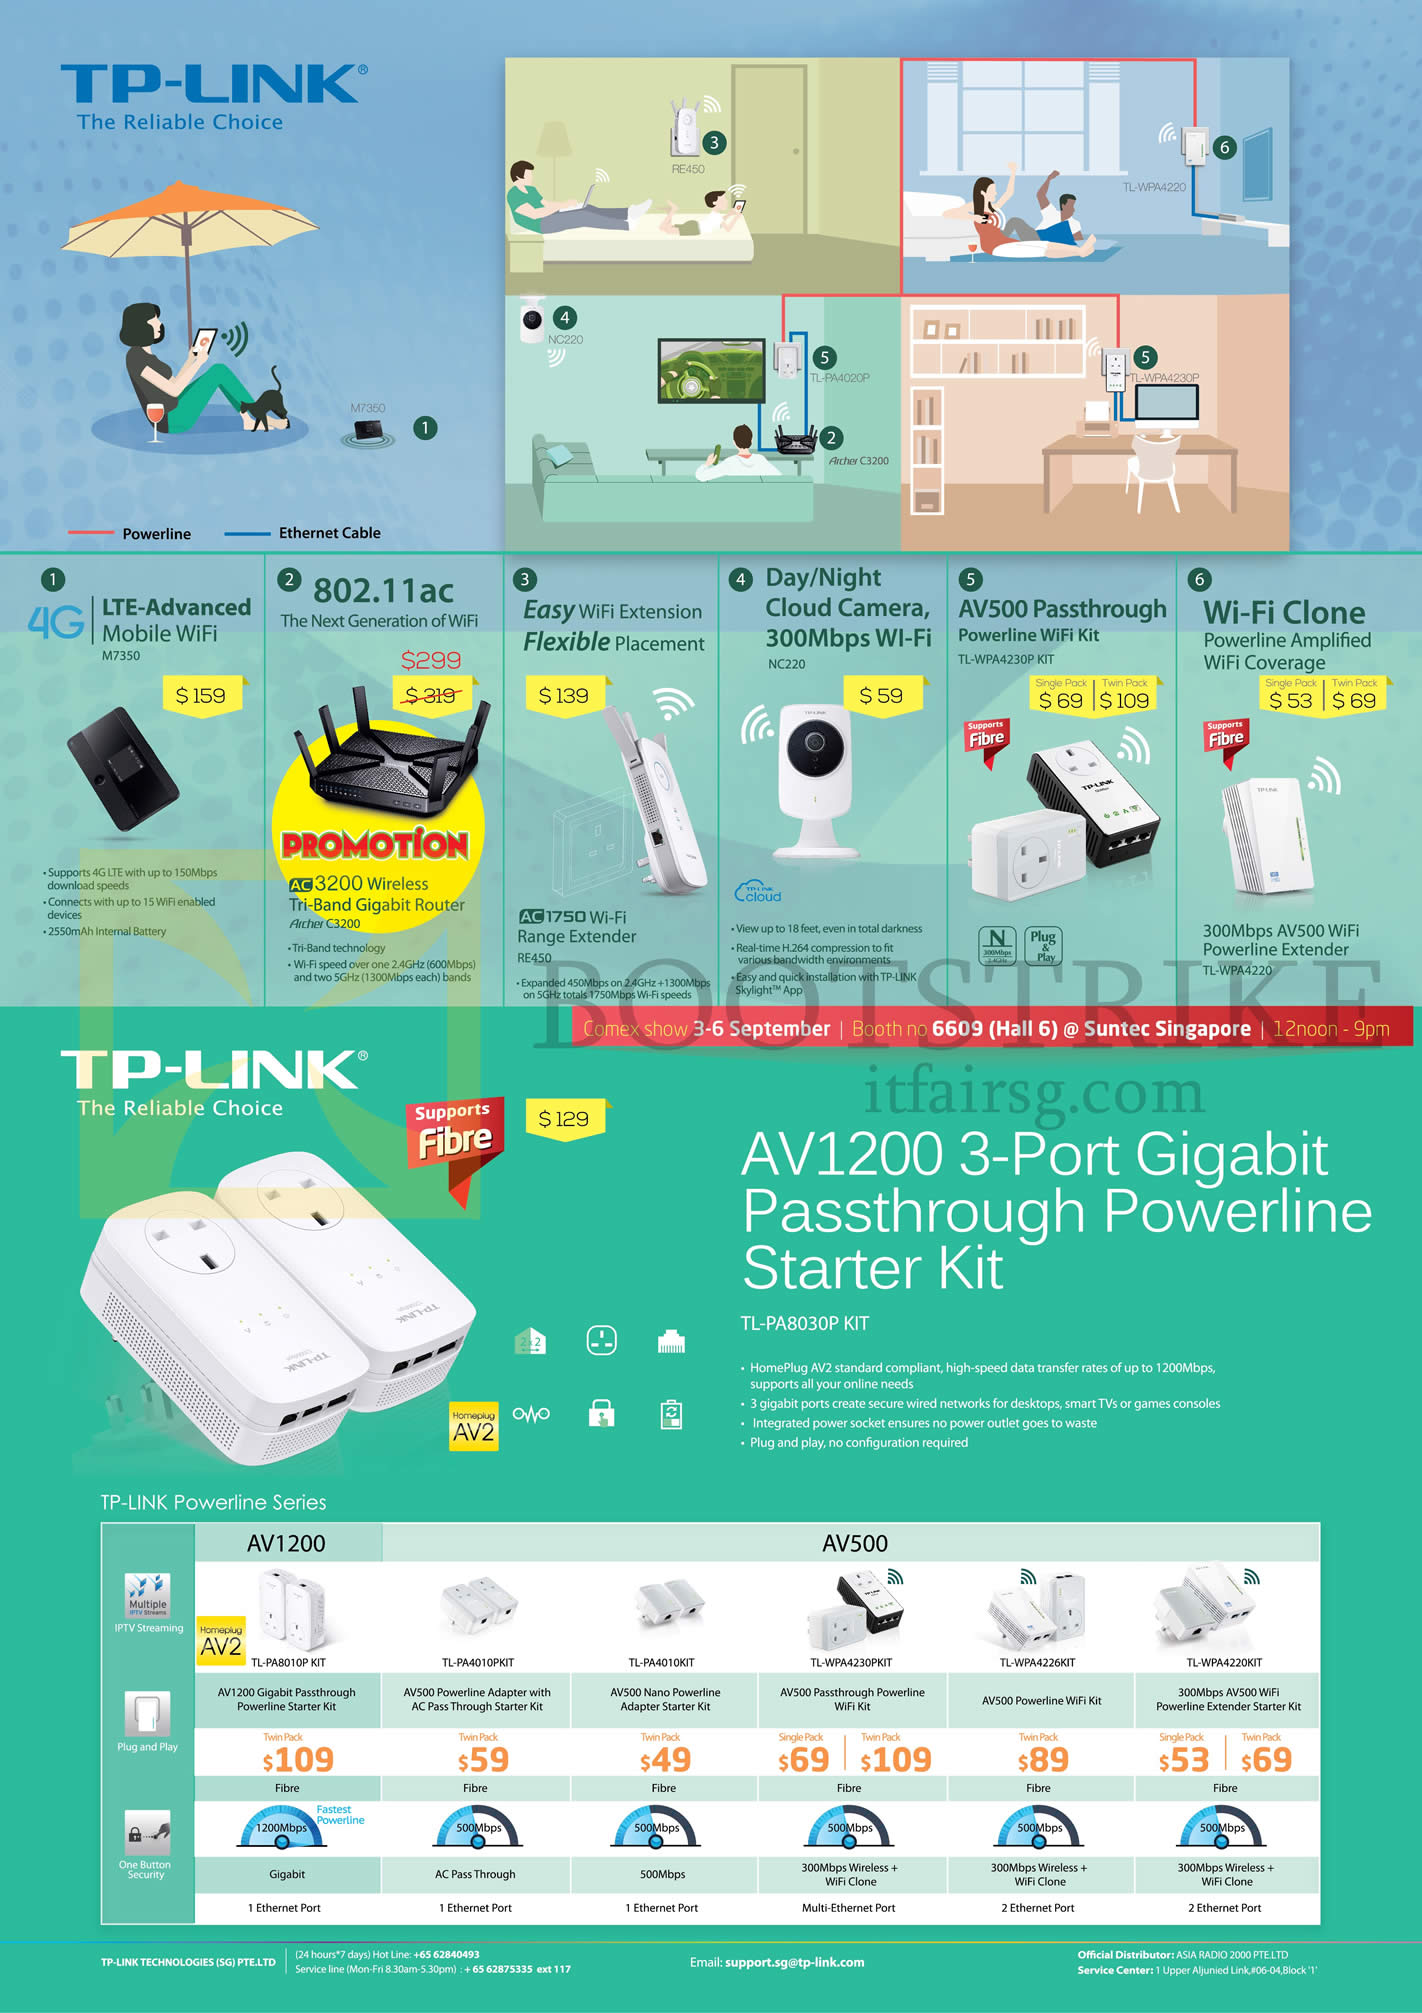 COMEX 2015 price list image brochure of Asia Radio TP-Link Networking Cloud Cameras, IPCam, Routers, Powerlines, AV1200, AV500, Wi-fi Clone, 802.11ac, Cloud Camera